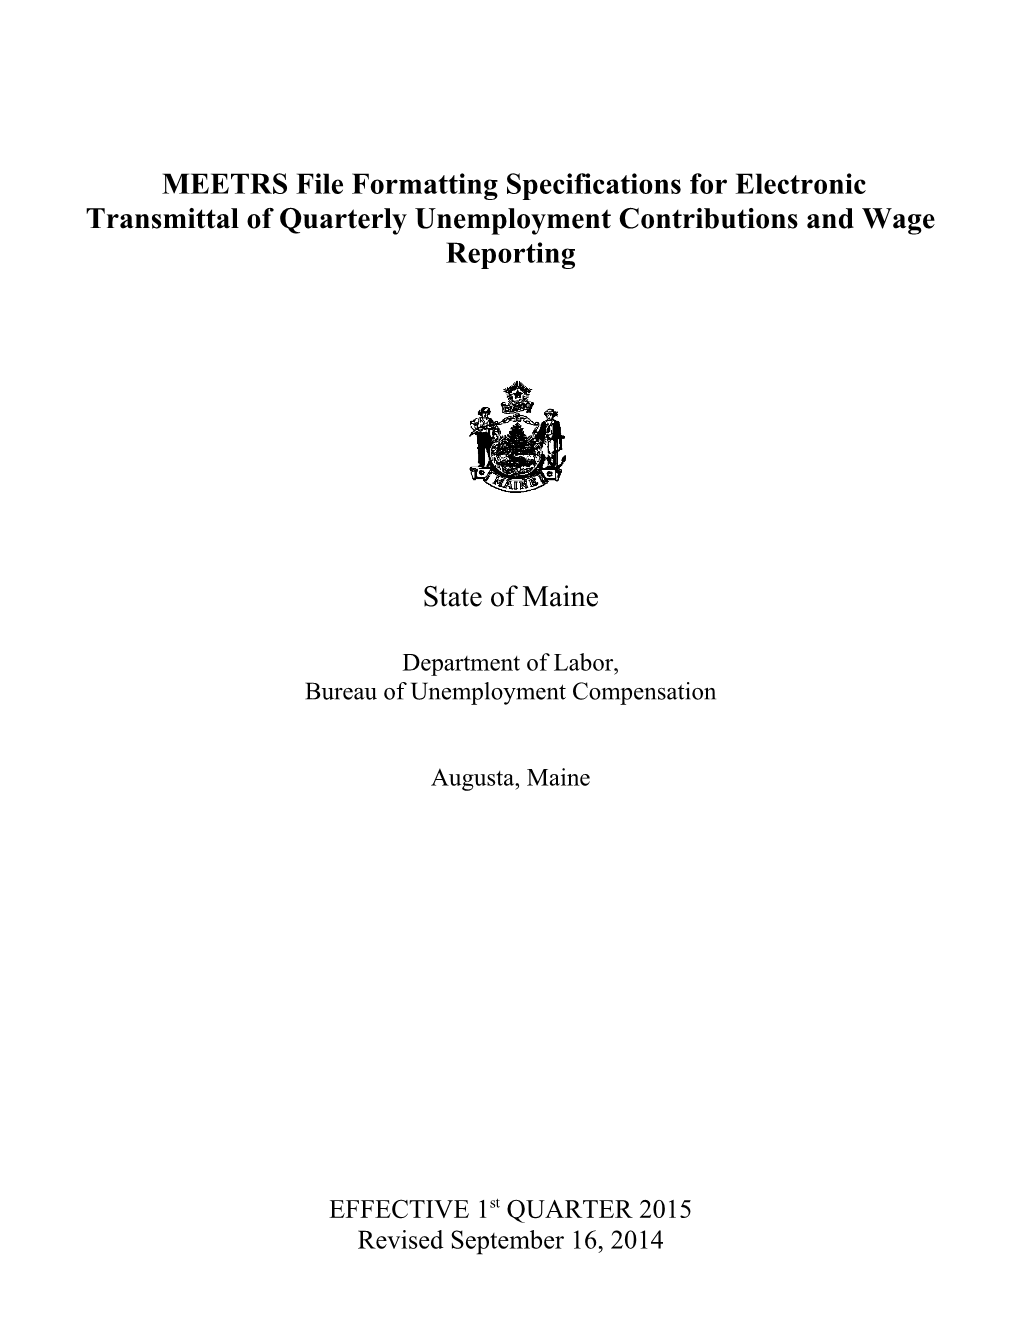 Maine ICESA File Formatting Specifications for Electronic Transmittal of Income Tax Withholding s1